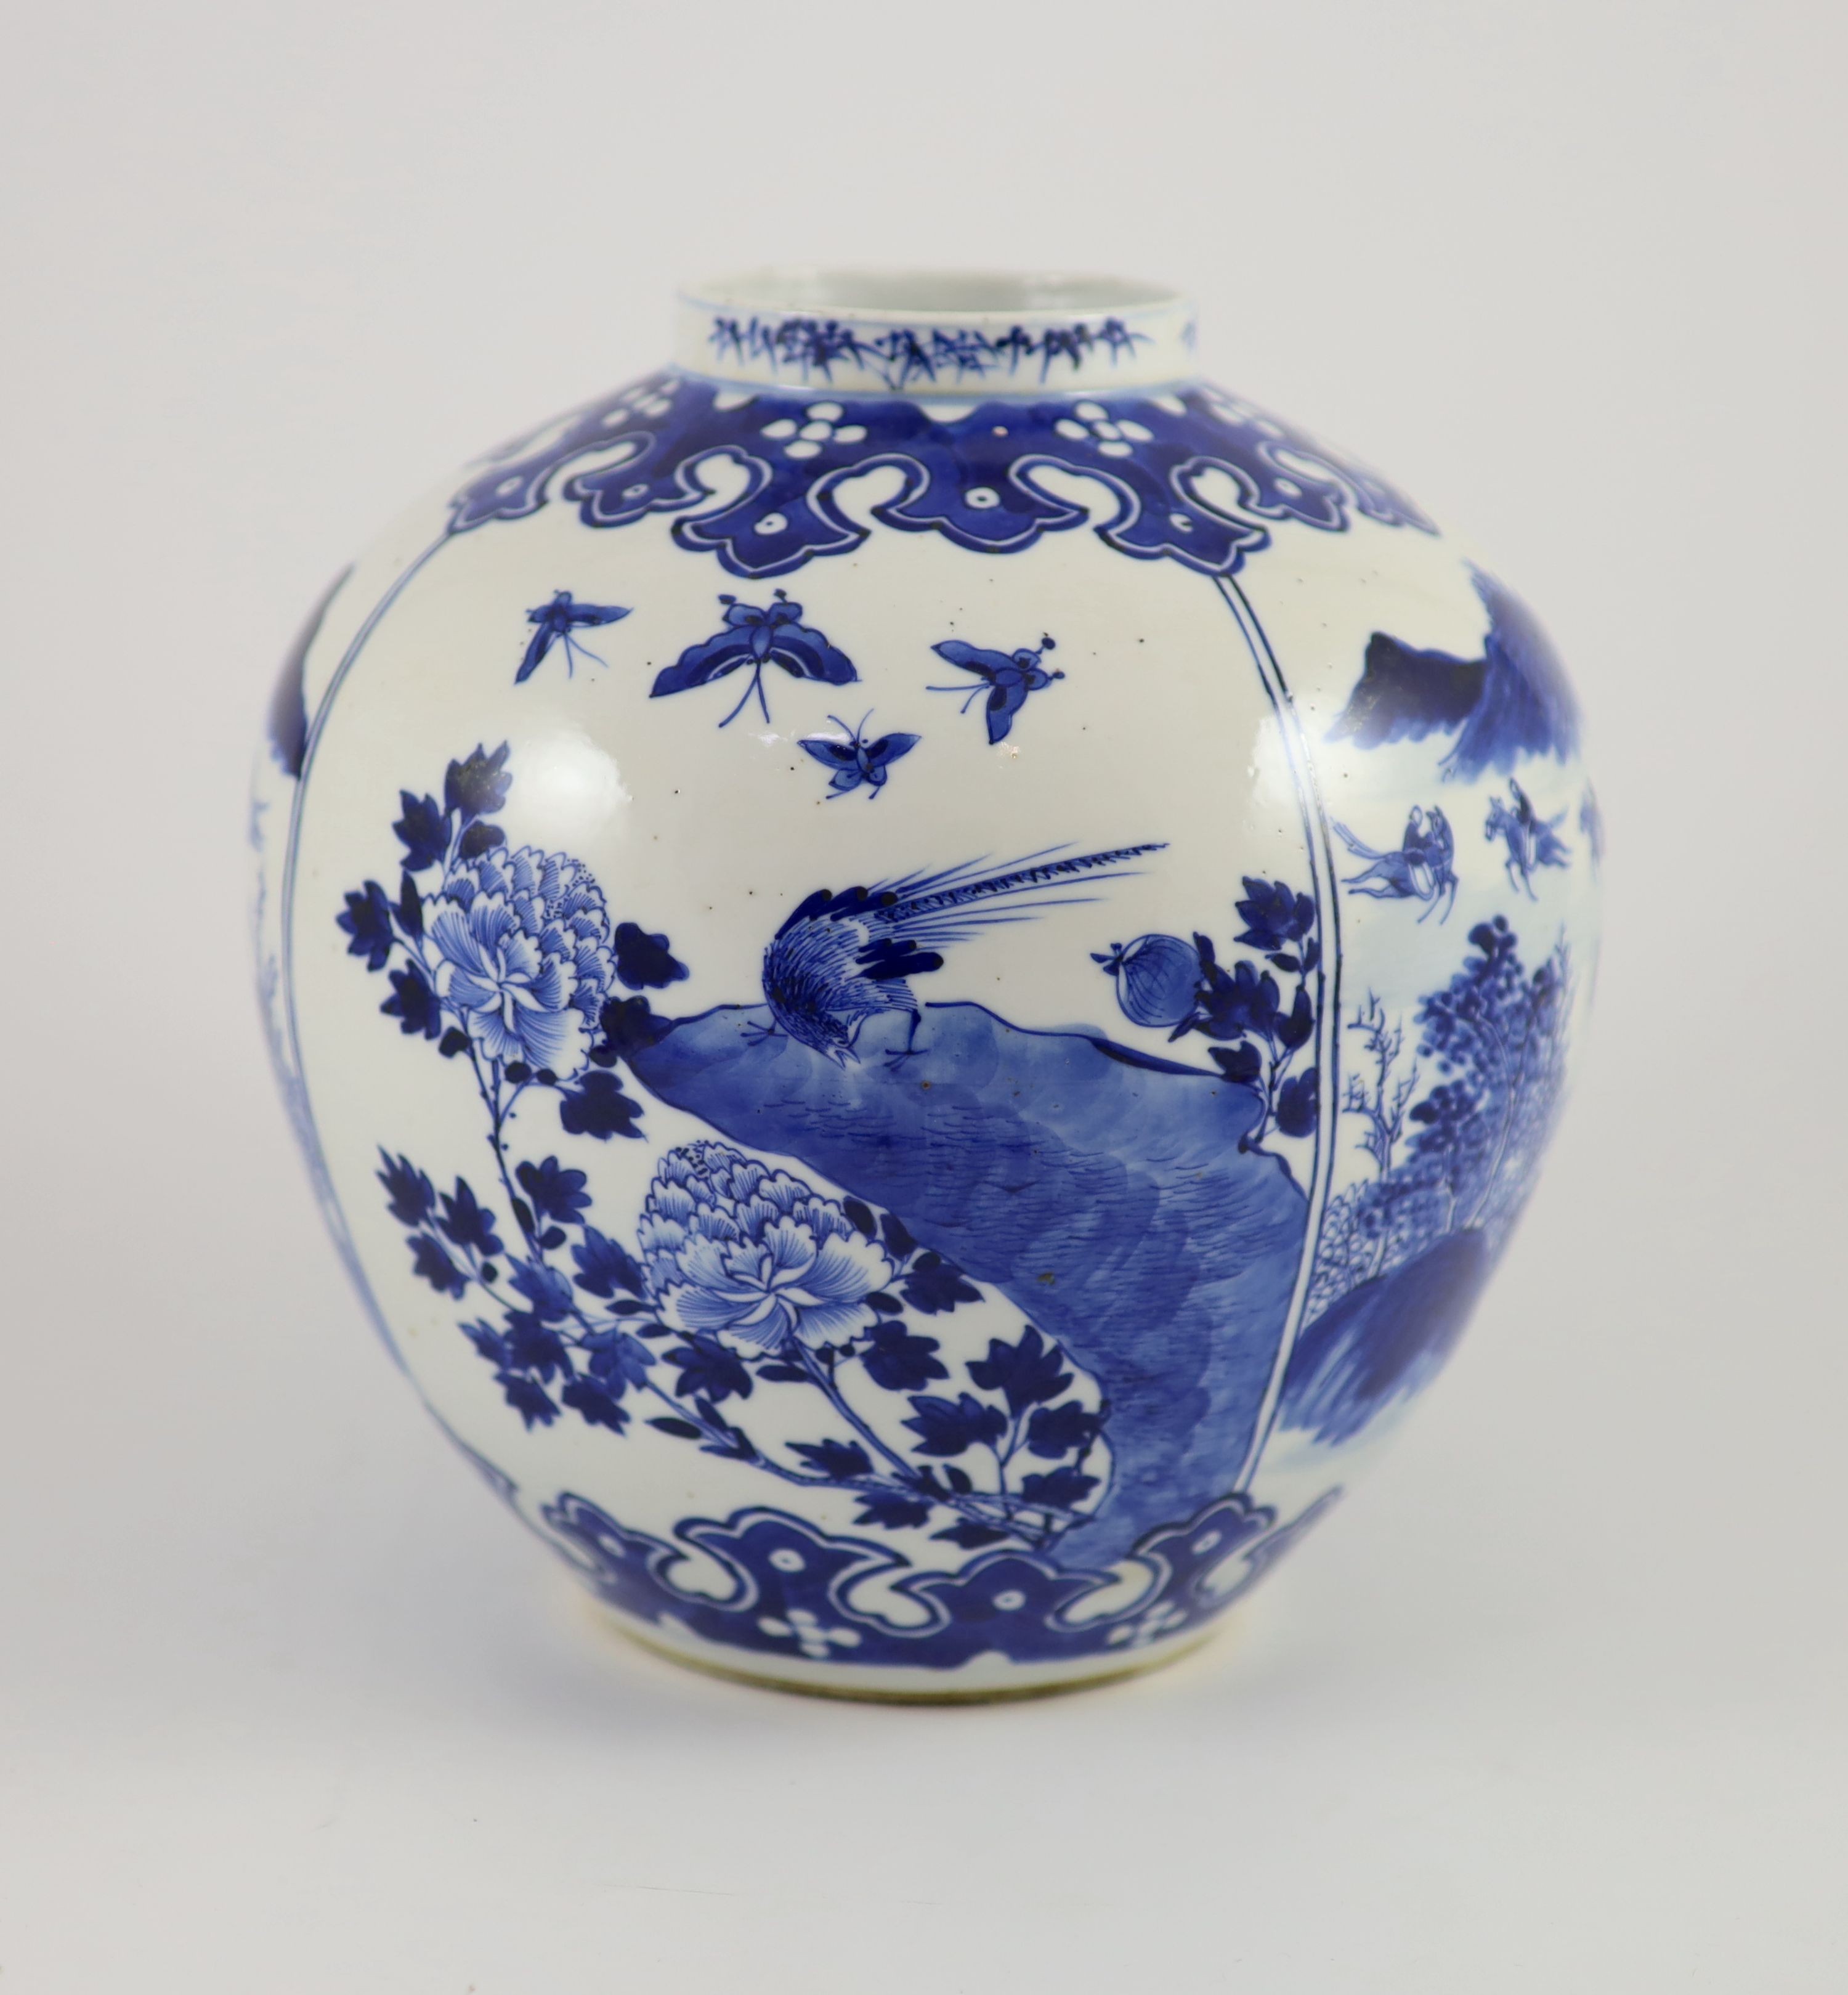 A Chinese blue and white ovoid jar, 19th century,the panels painted with figures riding on horseback - Image 2 of 4